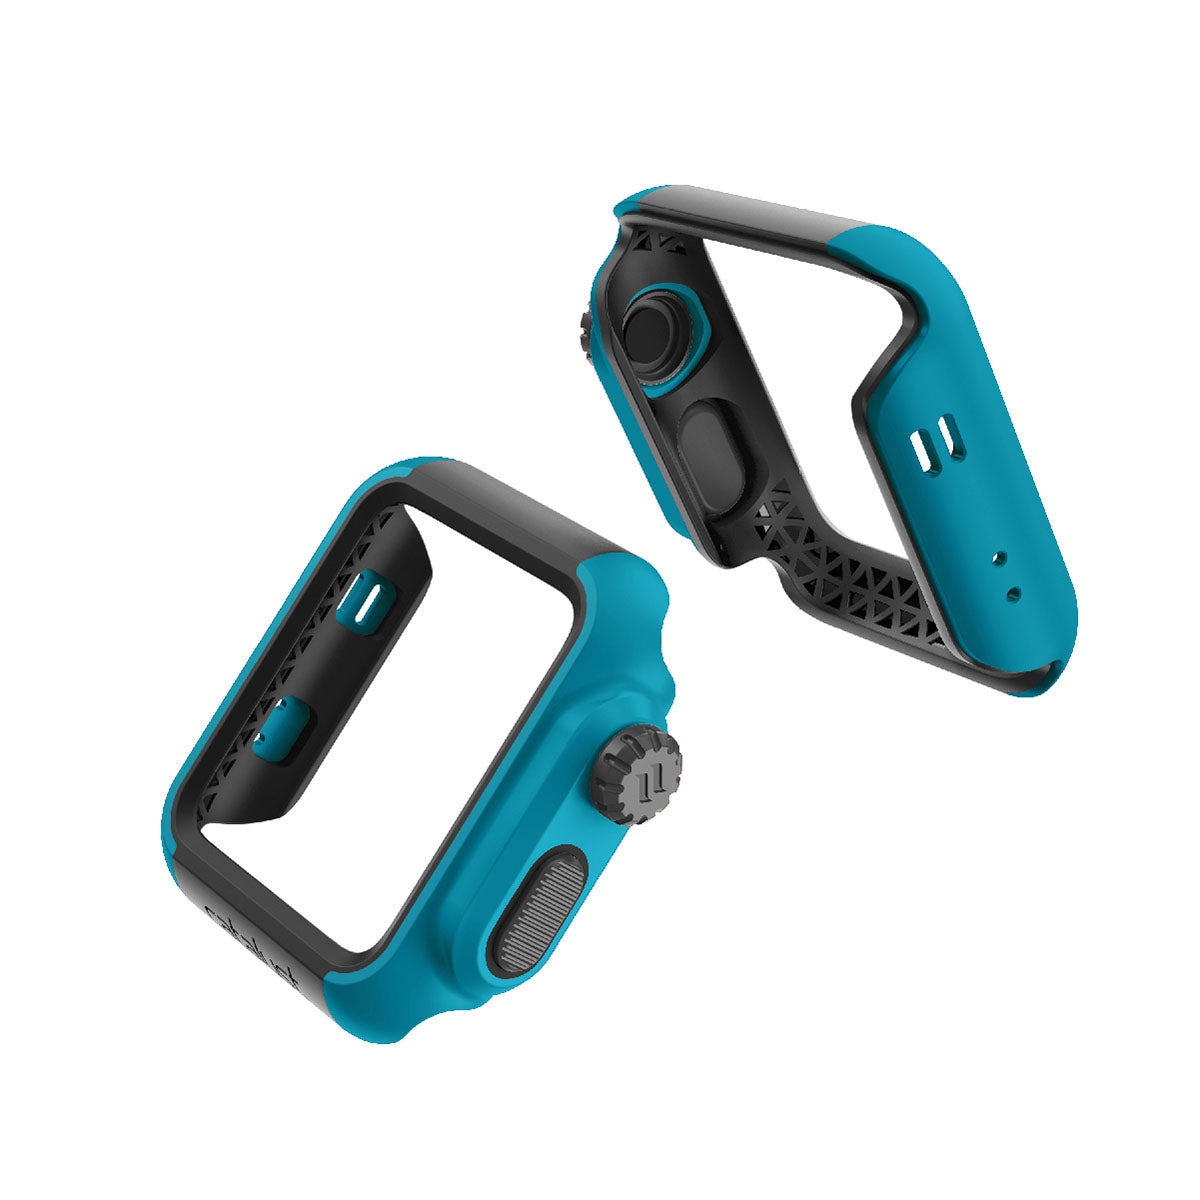 catalyst apple watch series 3 2 42mm impact protection case views of all the sides of the impact protection case glacier blue